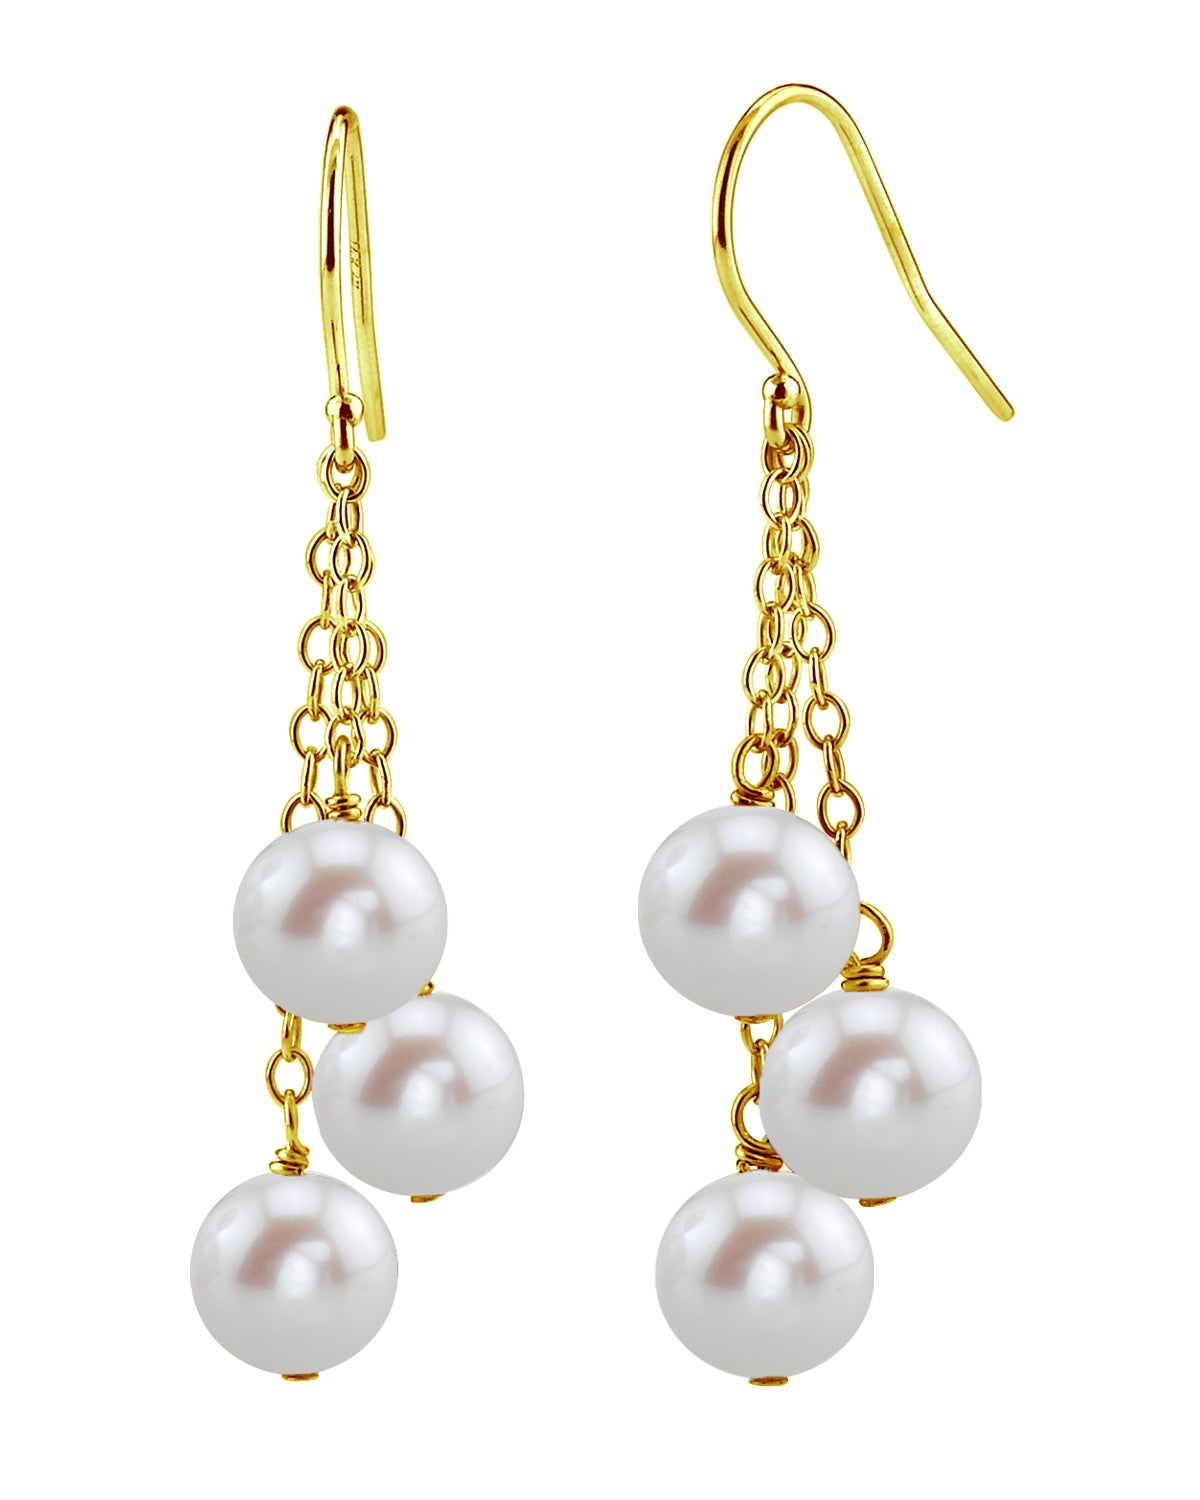 White Freshwater Pearl Cluster Earrings - Third Image